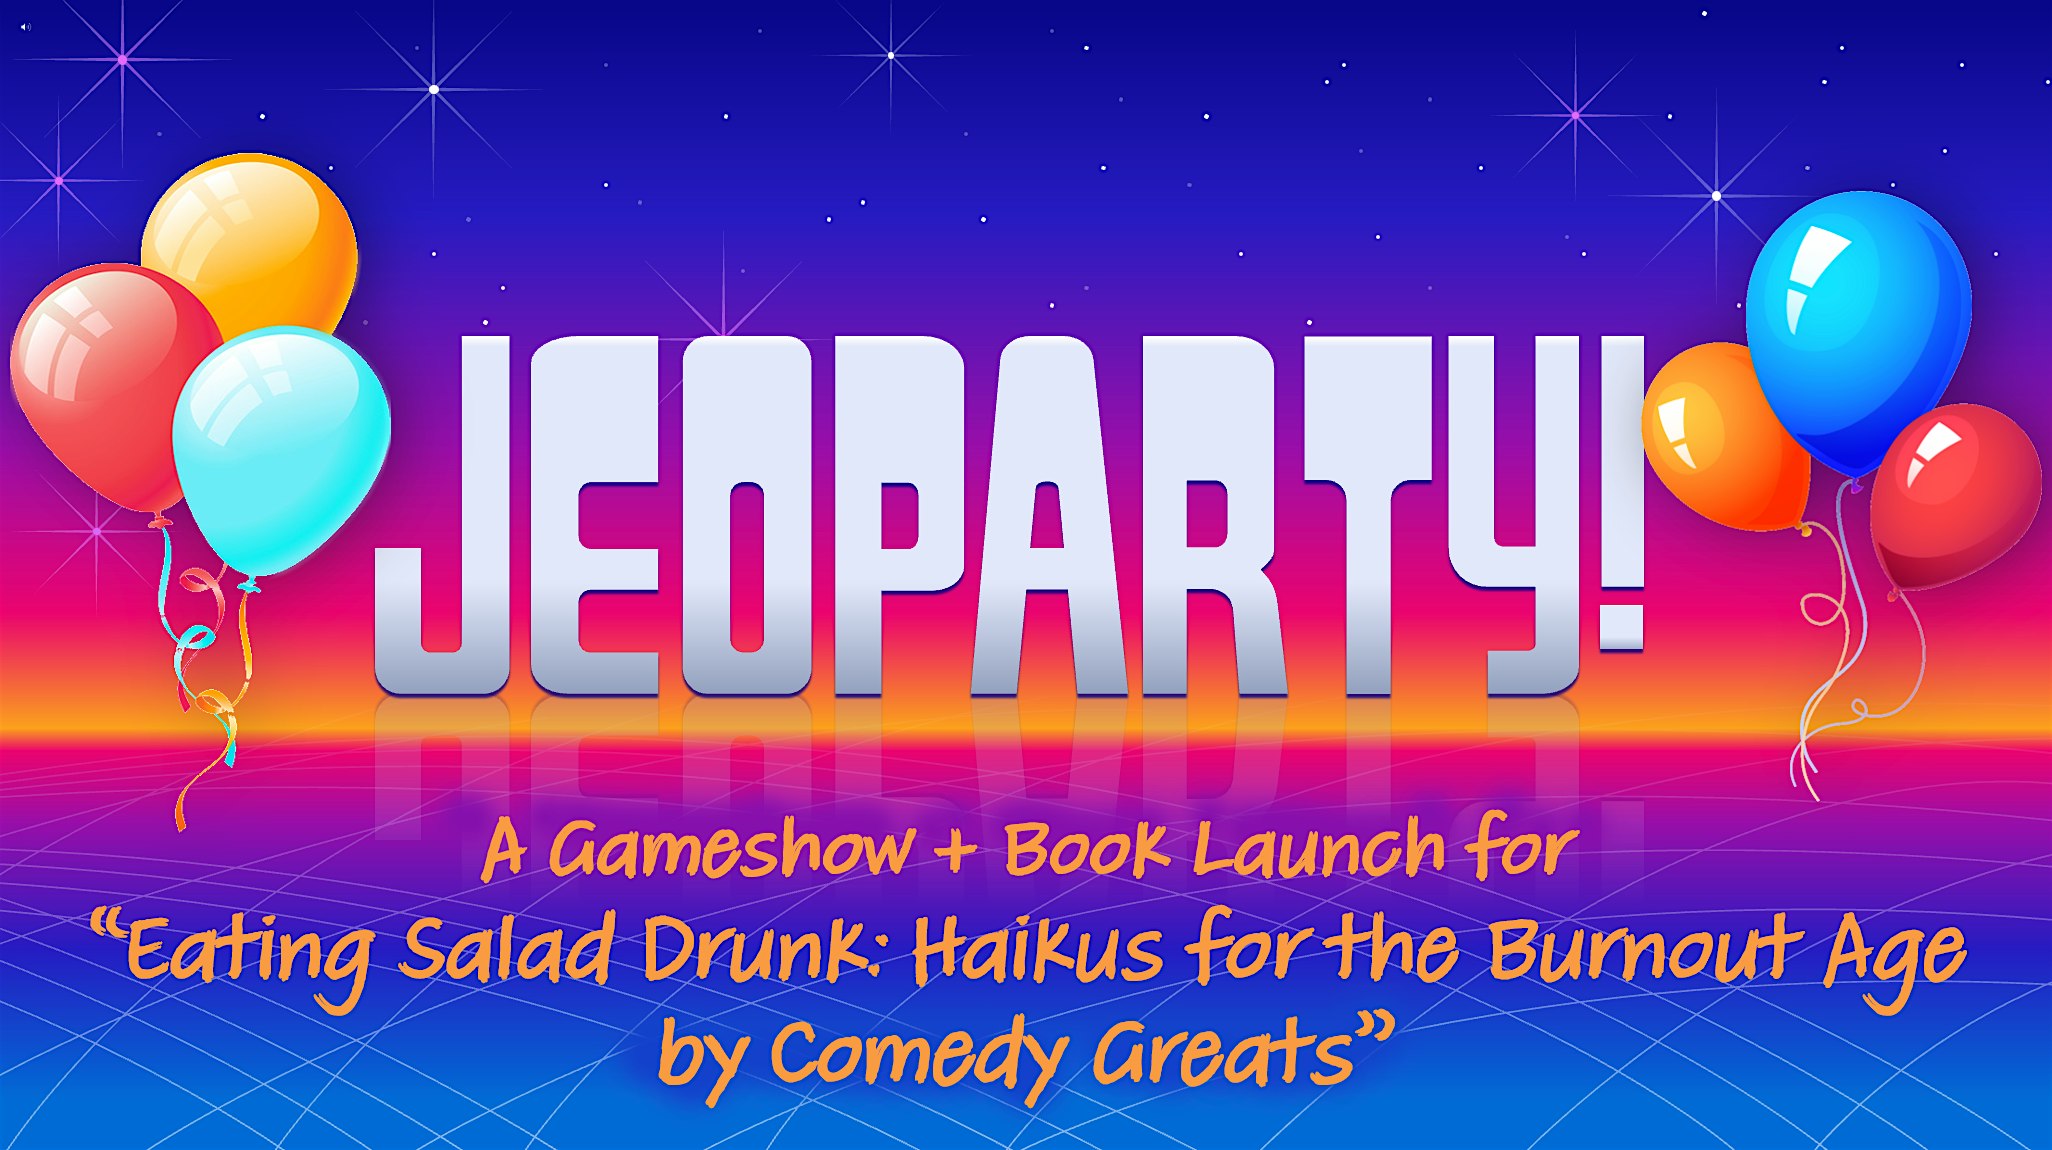 Jeoparty! The Book Launch Edition